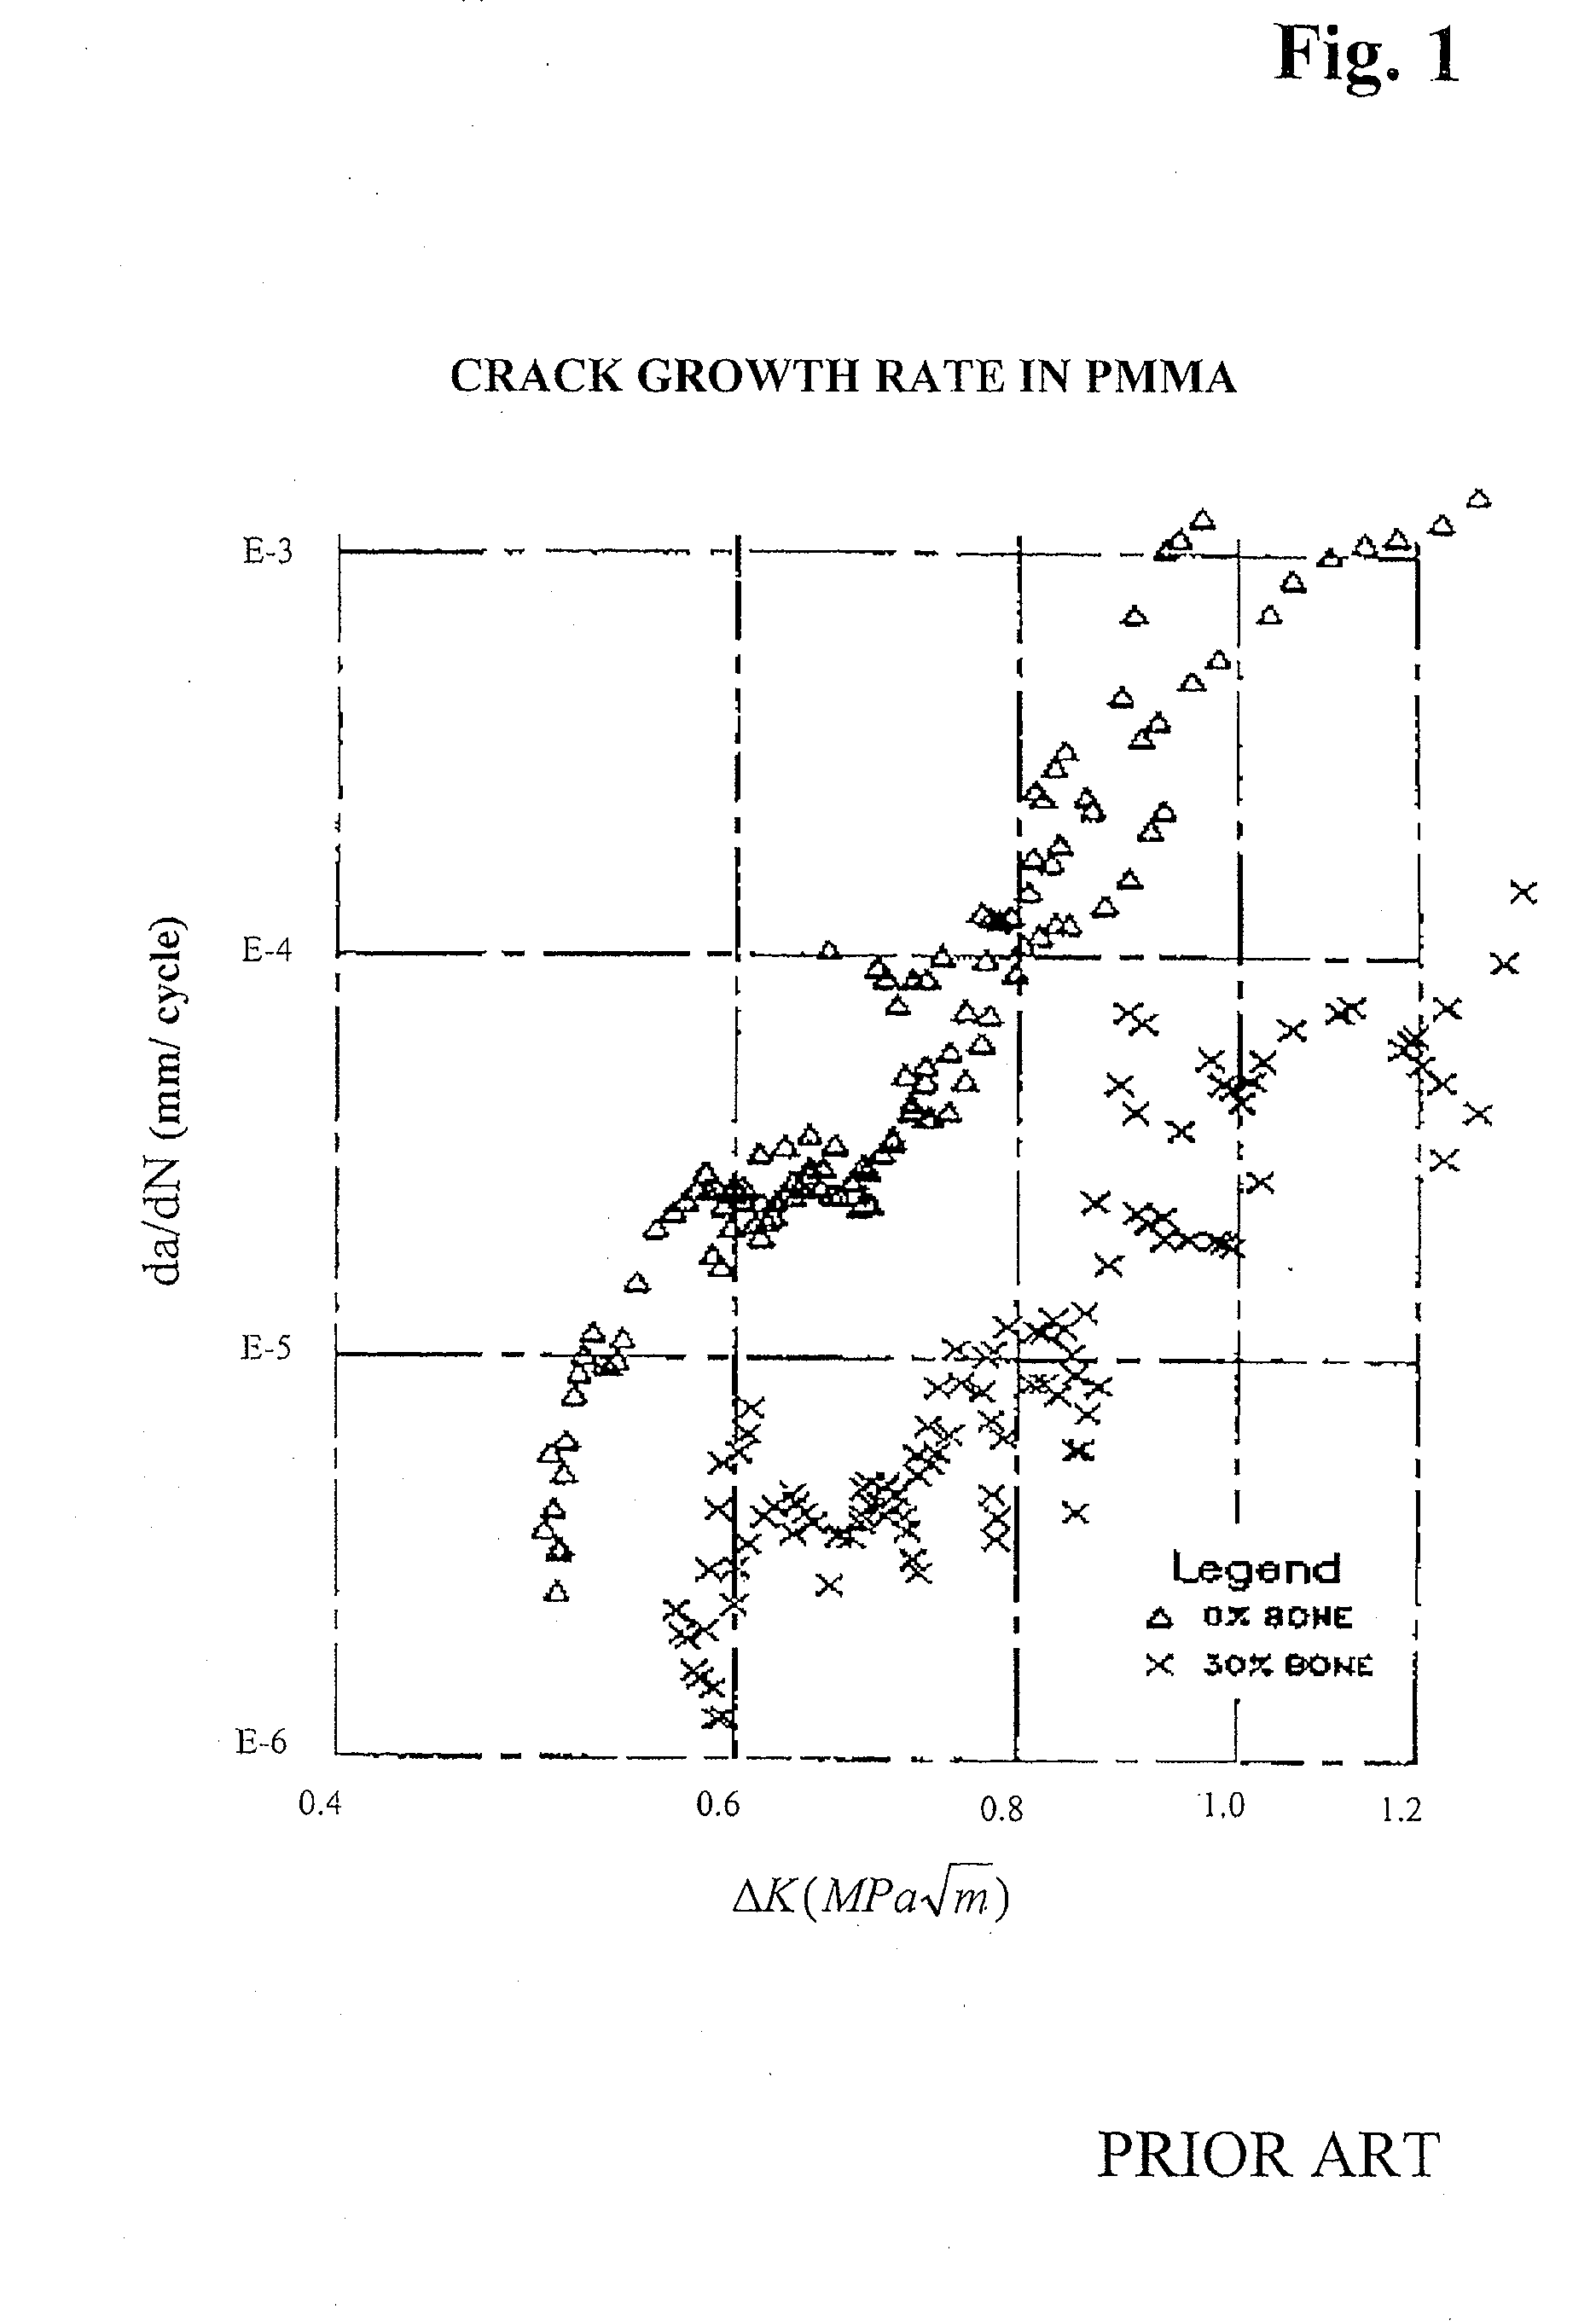 Bone cement composite containing particles in a non-uniform spatial distribution and devices for implementation